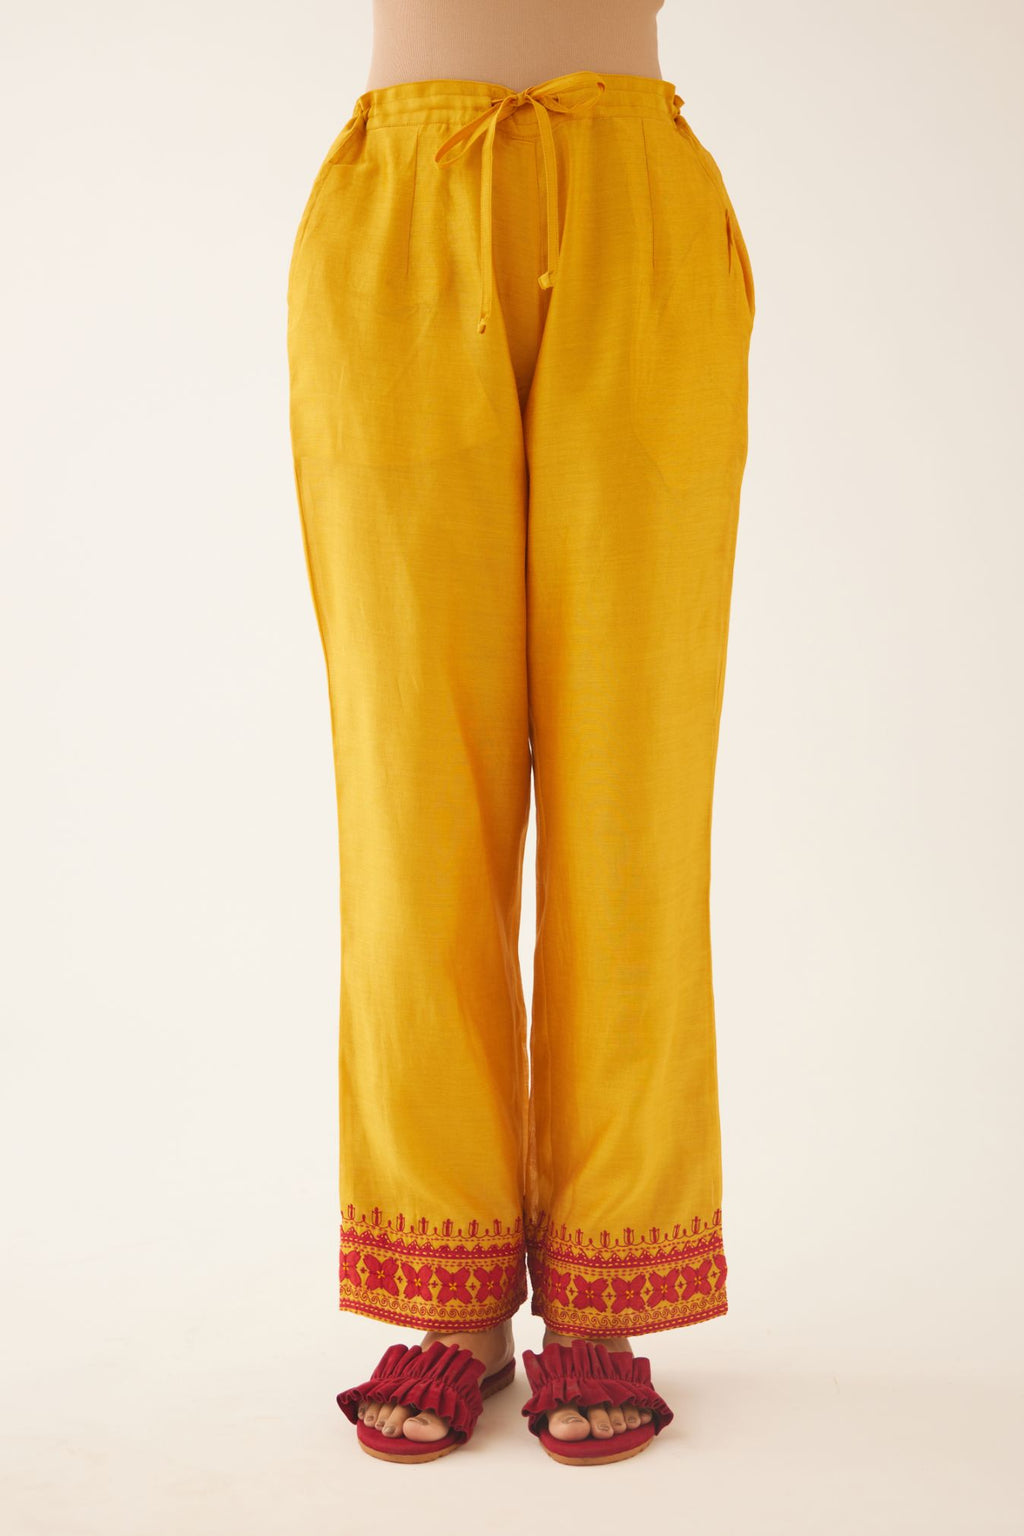 Golden Yellow silk chanderi straight pants detailed with contrast red applique & kantha embroidery at hem.